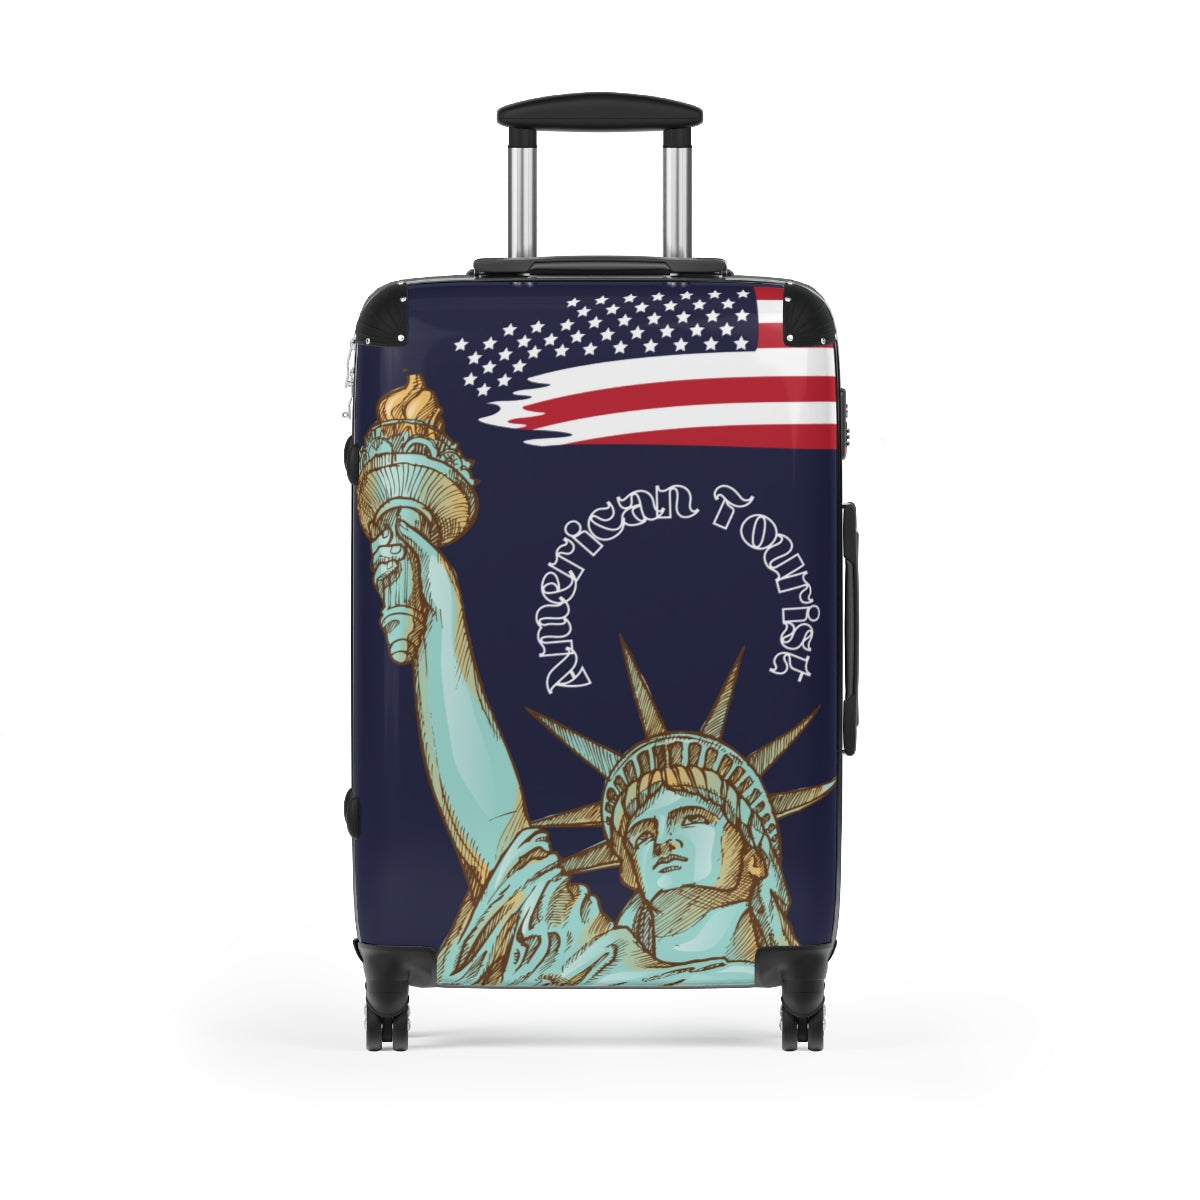 AMERICAN TOURIST SUITCASES, CARRY-ON SET, LUGGAGE FOR TOURIST, AMERICAN TOURIST